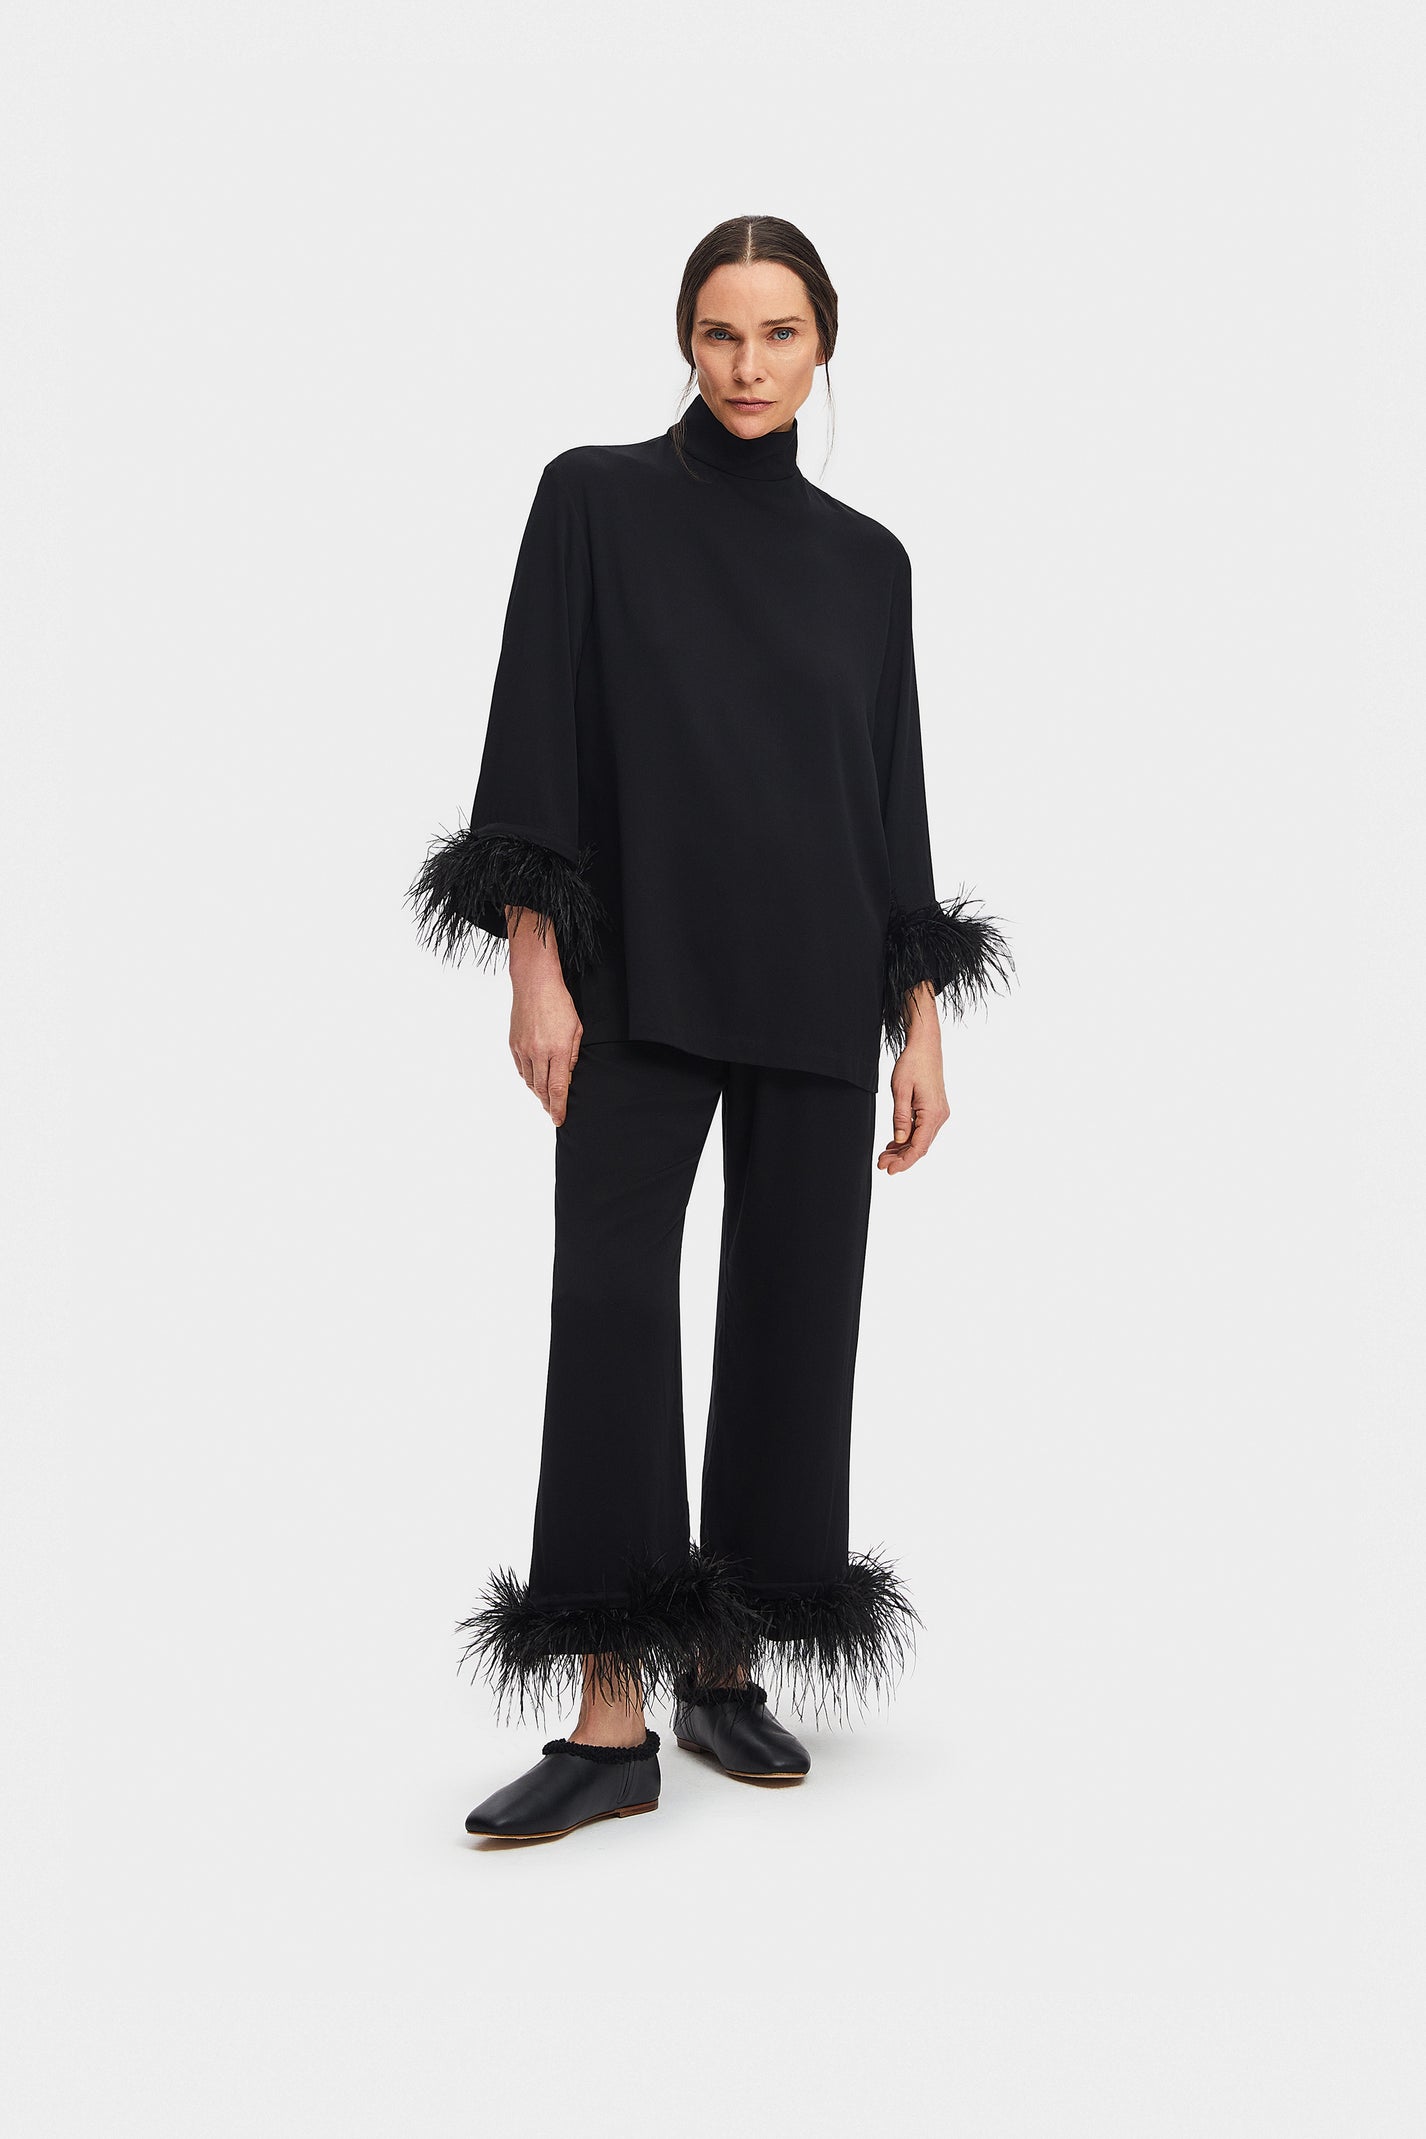 Daily Sleeper Black Tie Pajama with Detachable Feathers